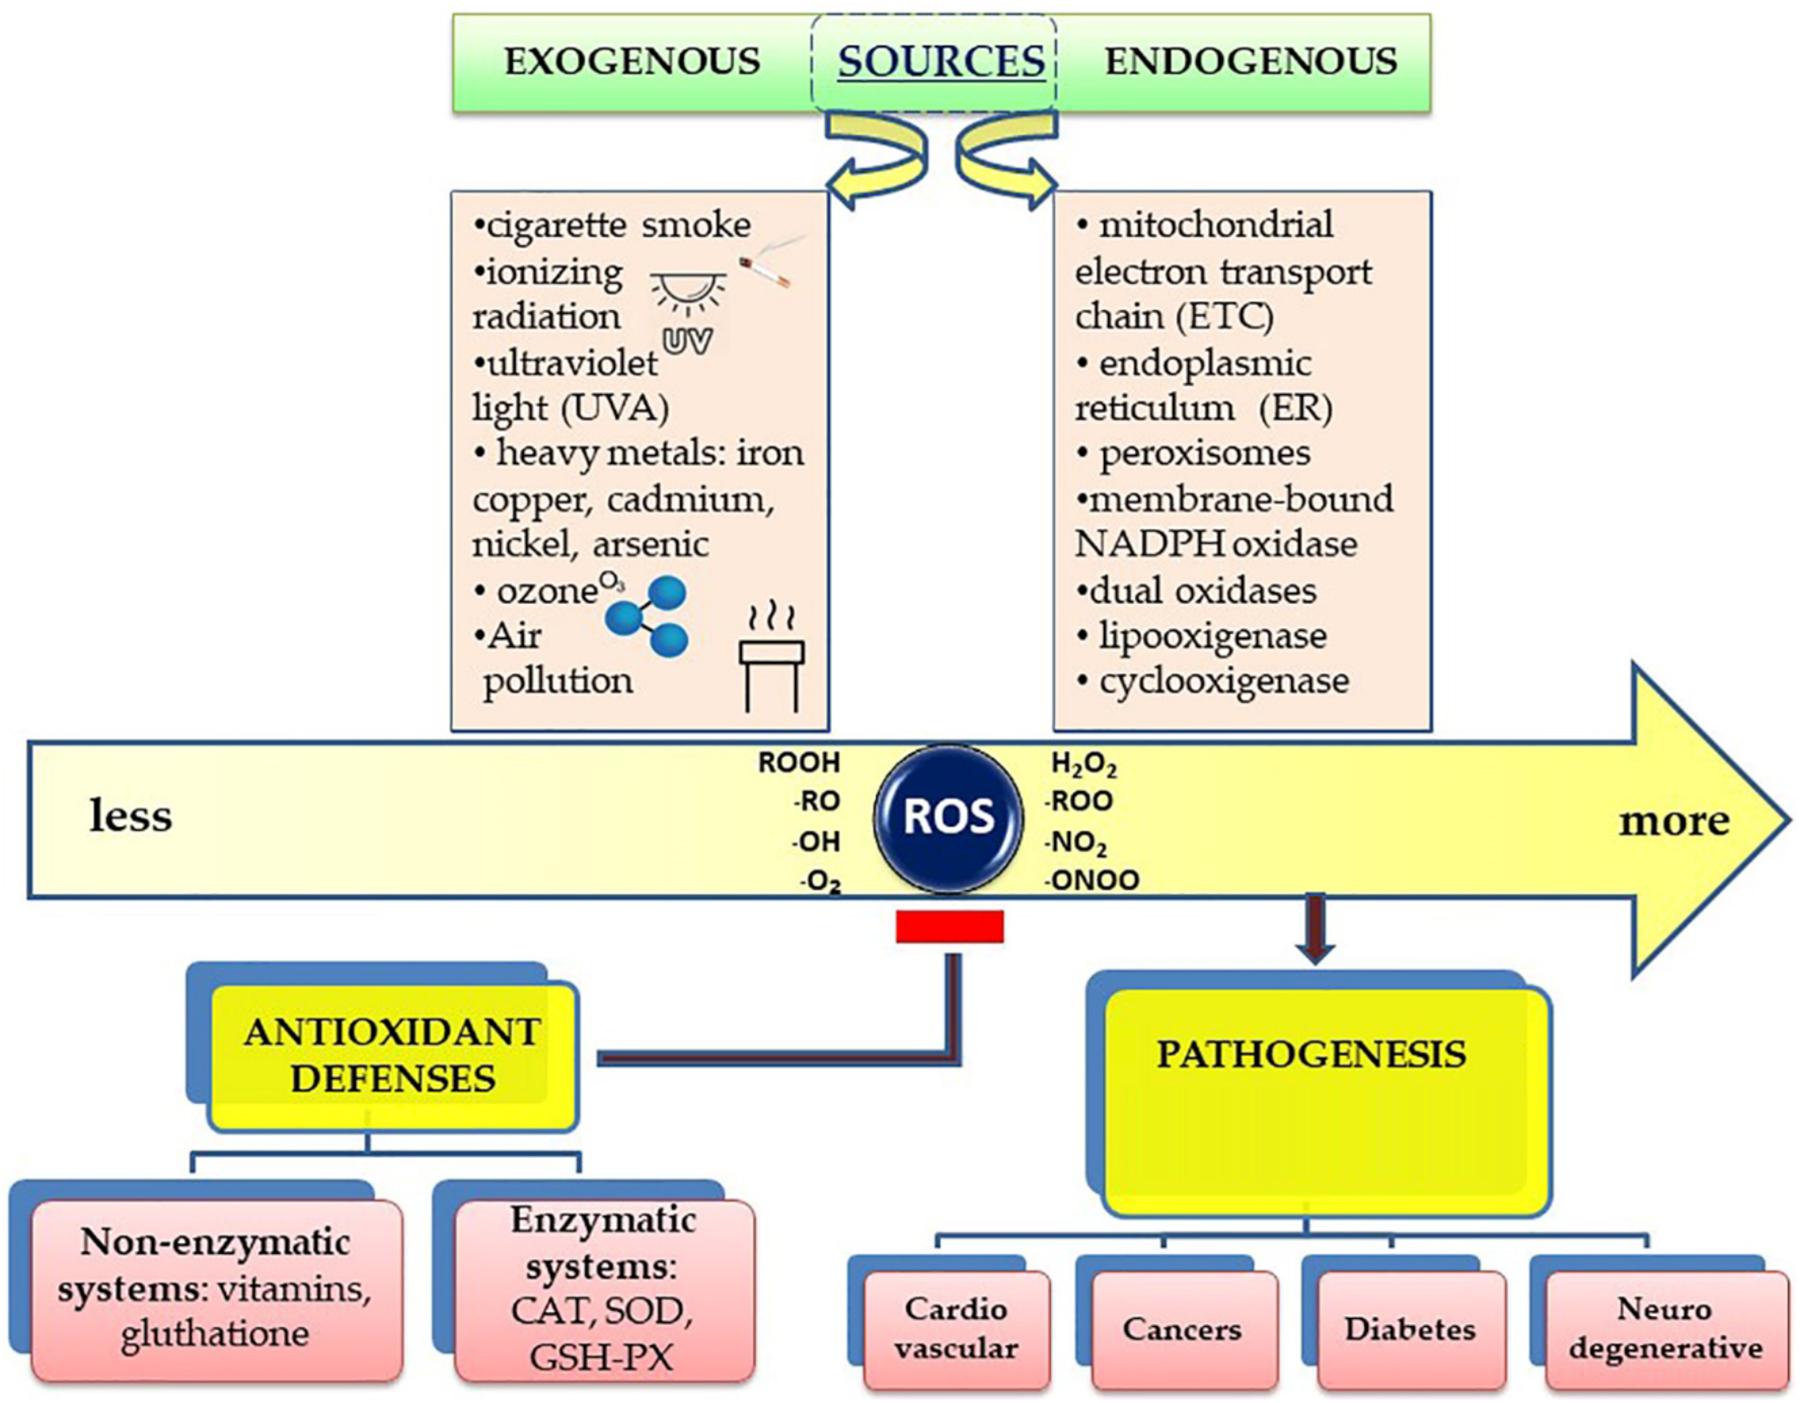 Frontiers  Lifestyle, Oxidative Stress, and Antioxidants: Back and Forth  in the Pathophysiology of Chronic Diseases